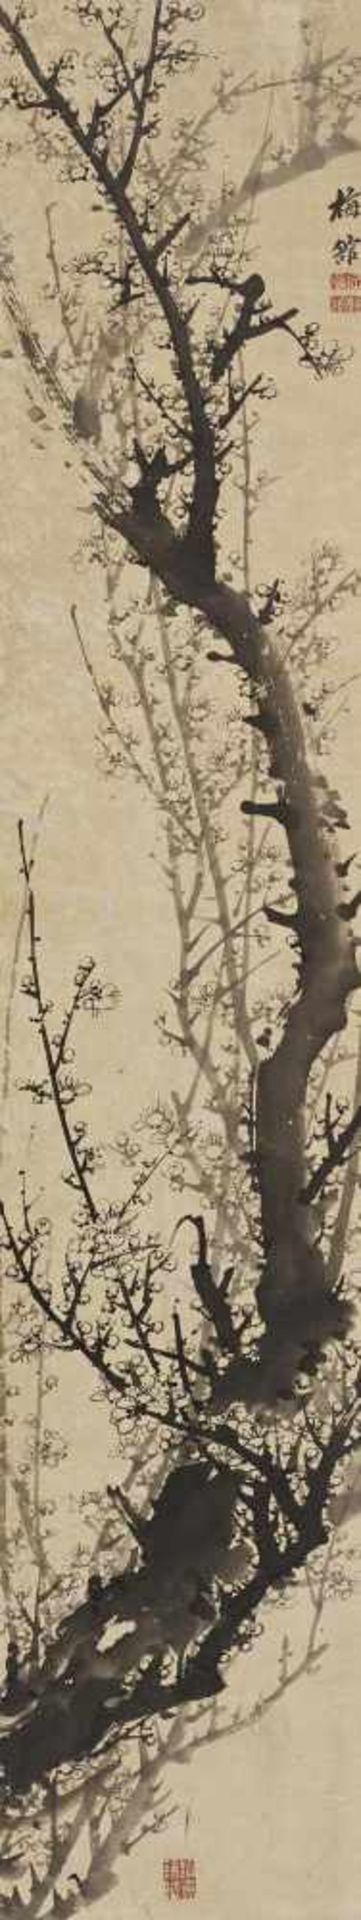 TWO INK PAINTINGS WITH PLUMS. China. 19th/20th c. Ink on paper resp. silk. a) Flowering plums.